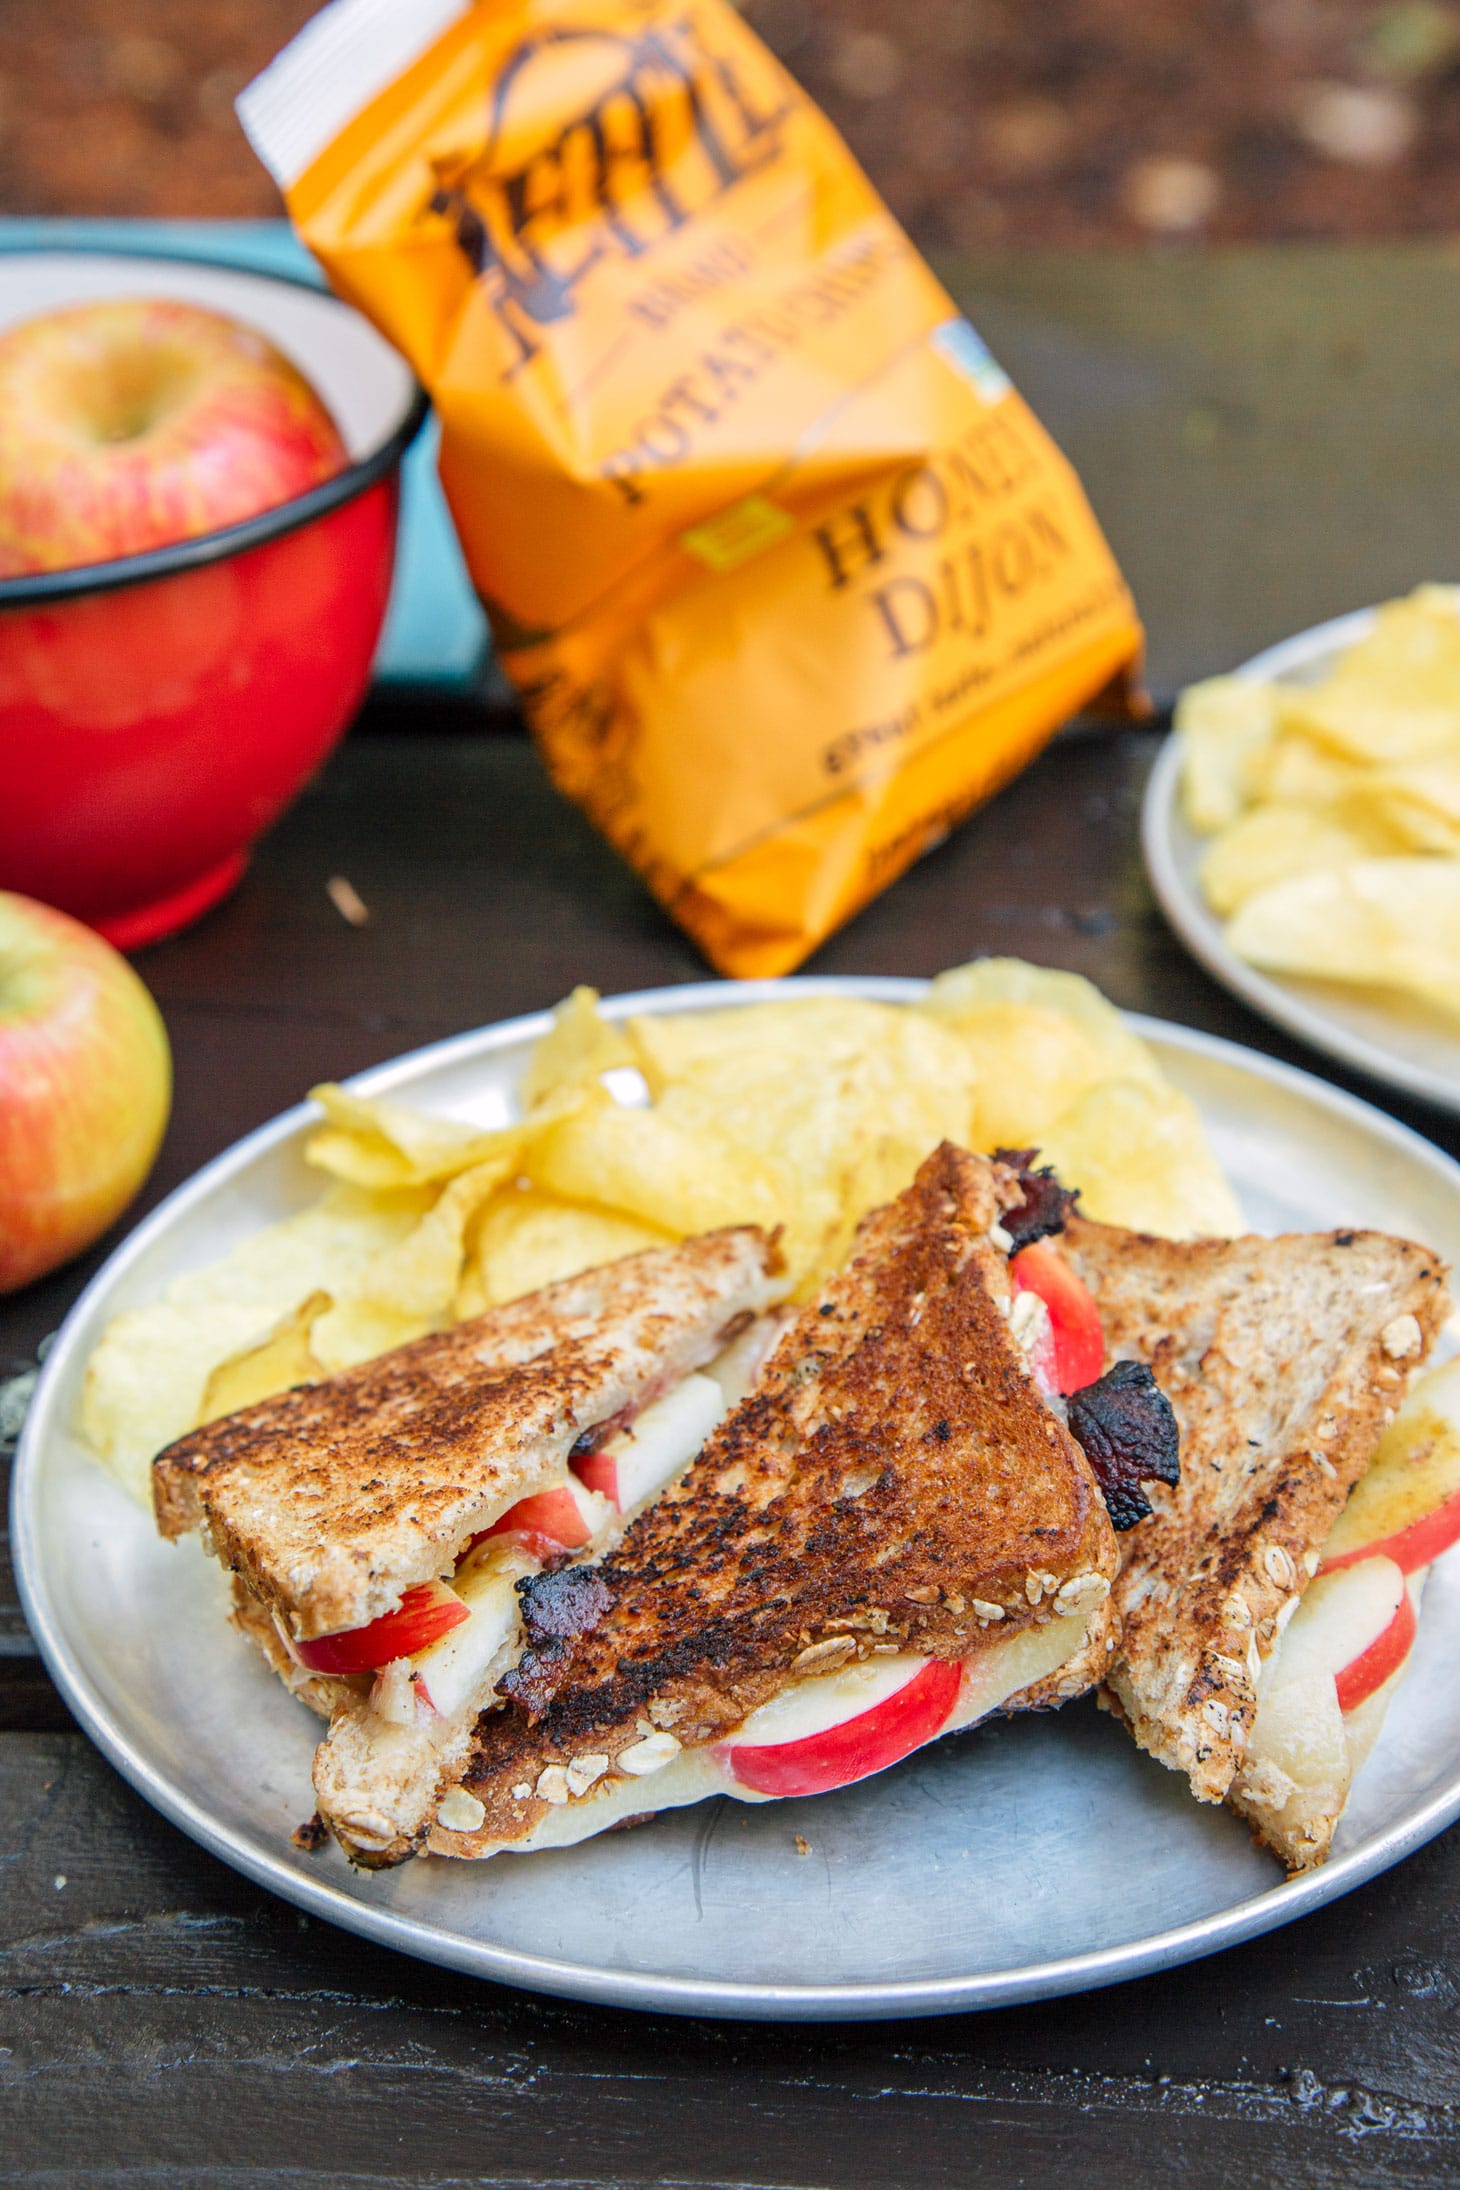 A plate with grilled cheese and chips on a camp table. There is an orange chip bag and bowl of apples in the background.